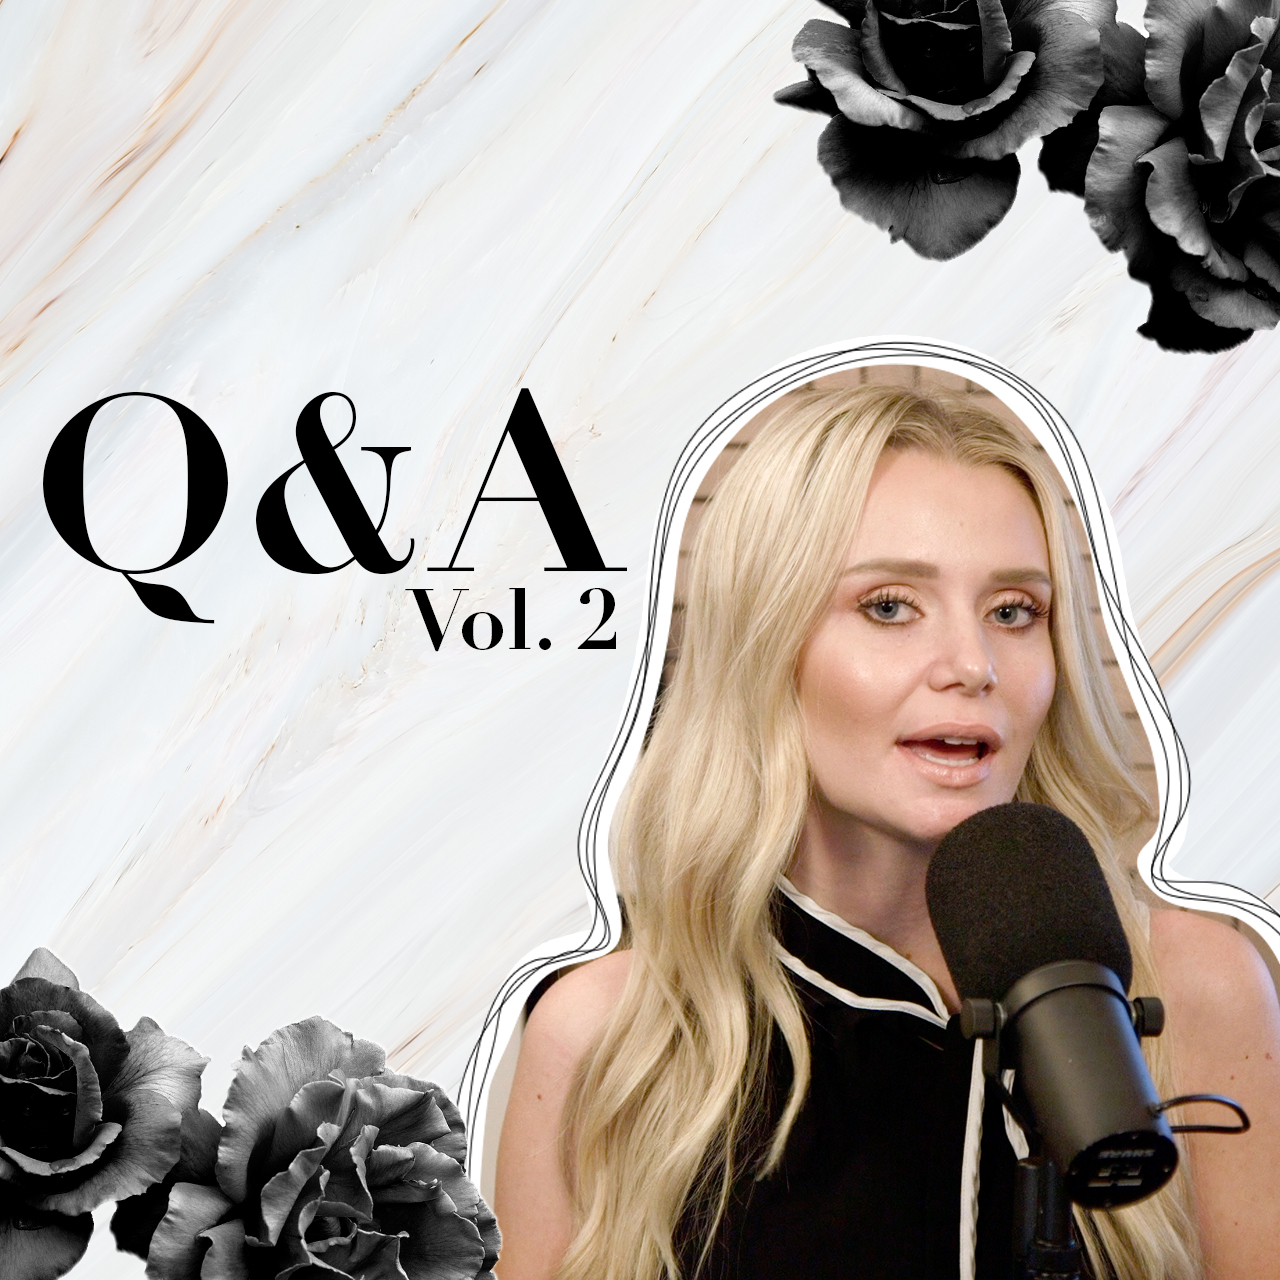 Questions & Answers Vol. 2